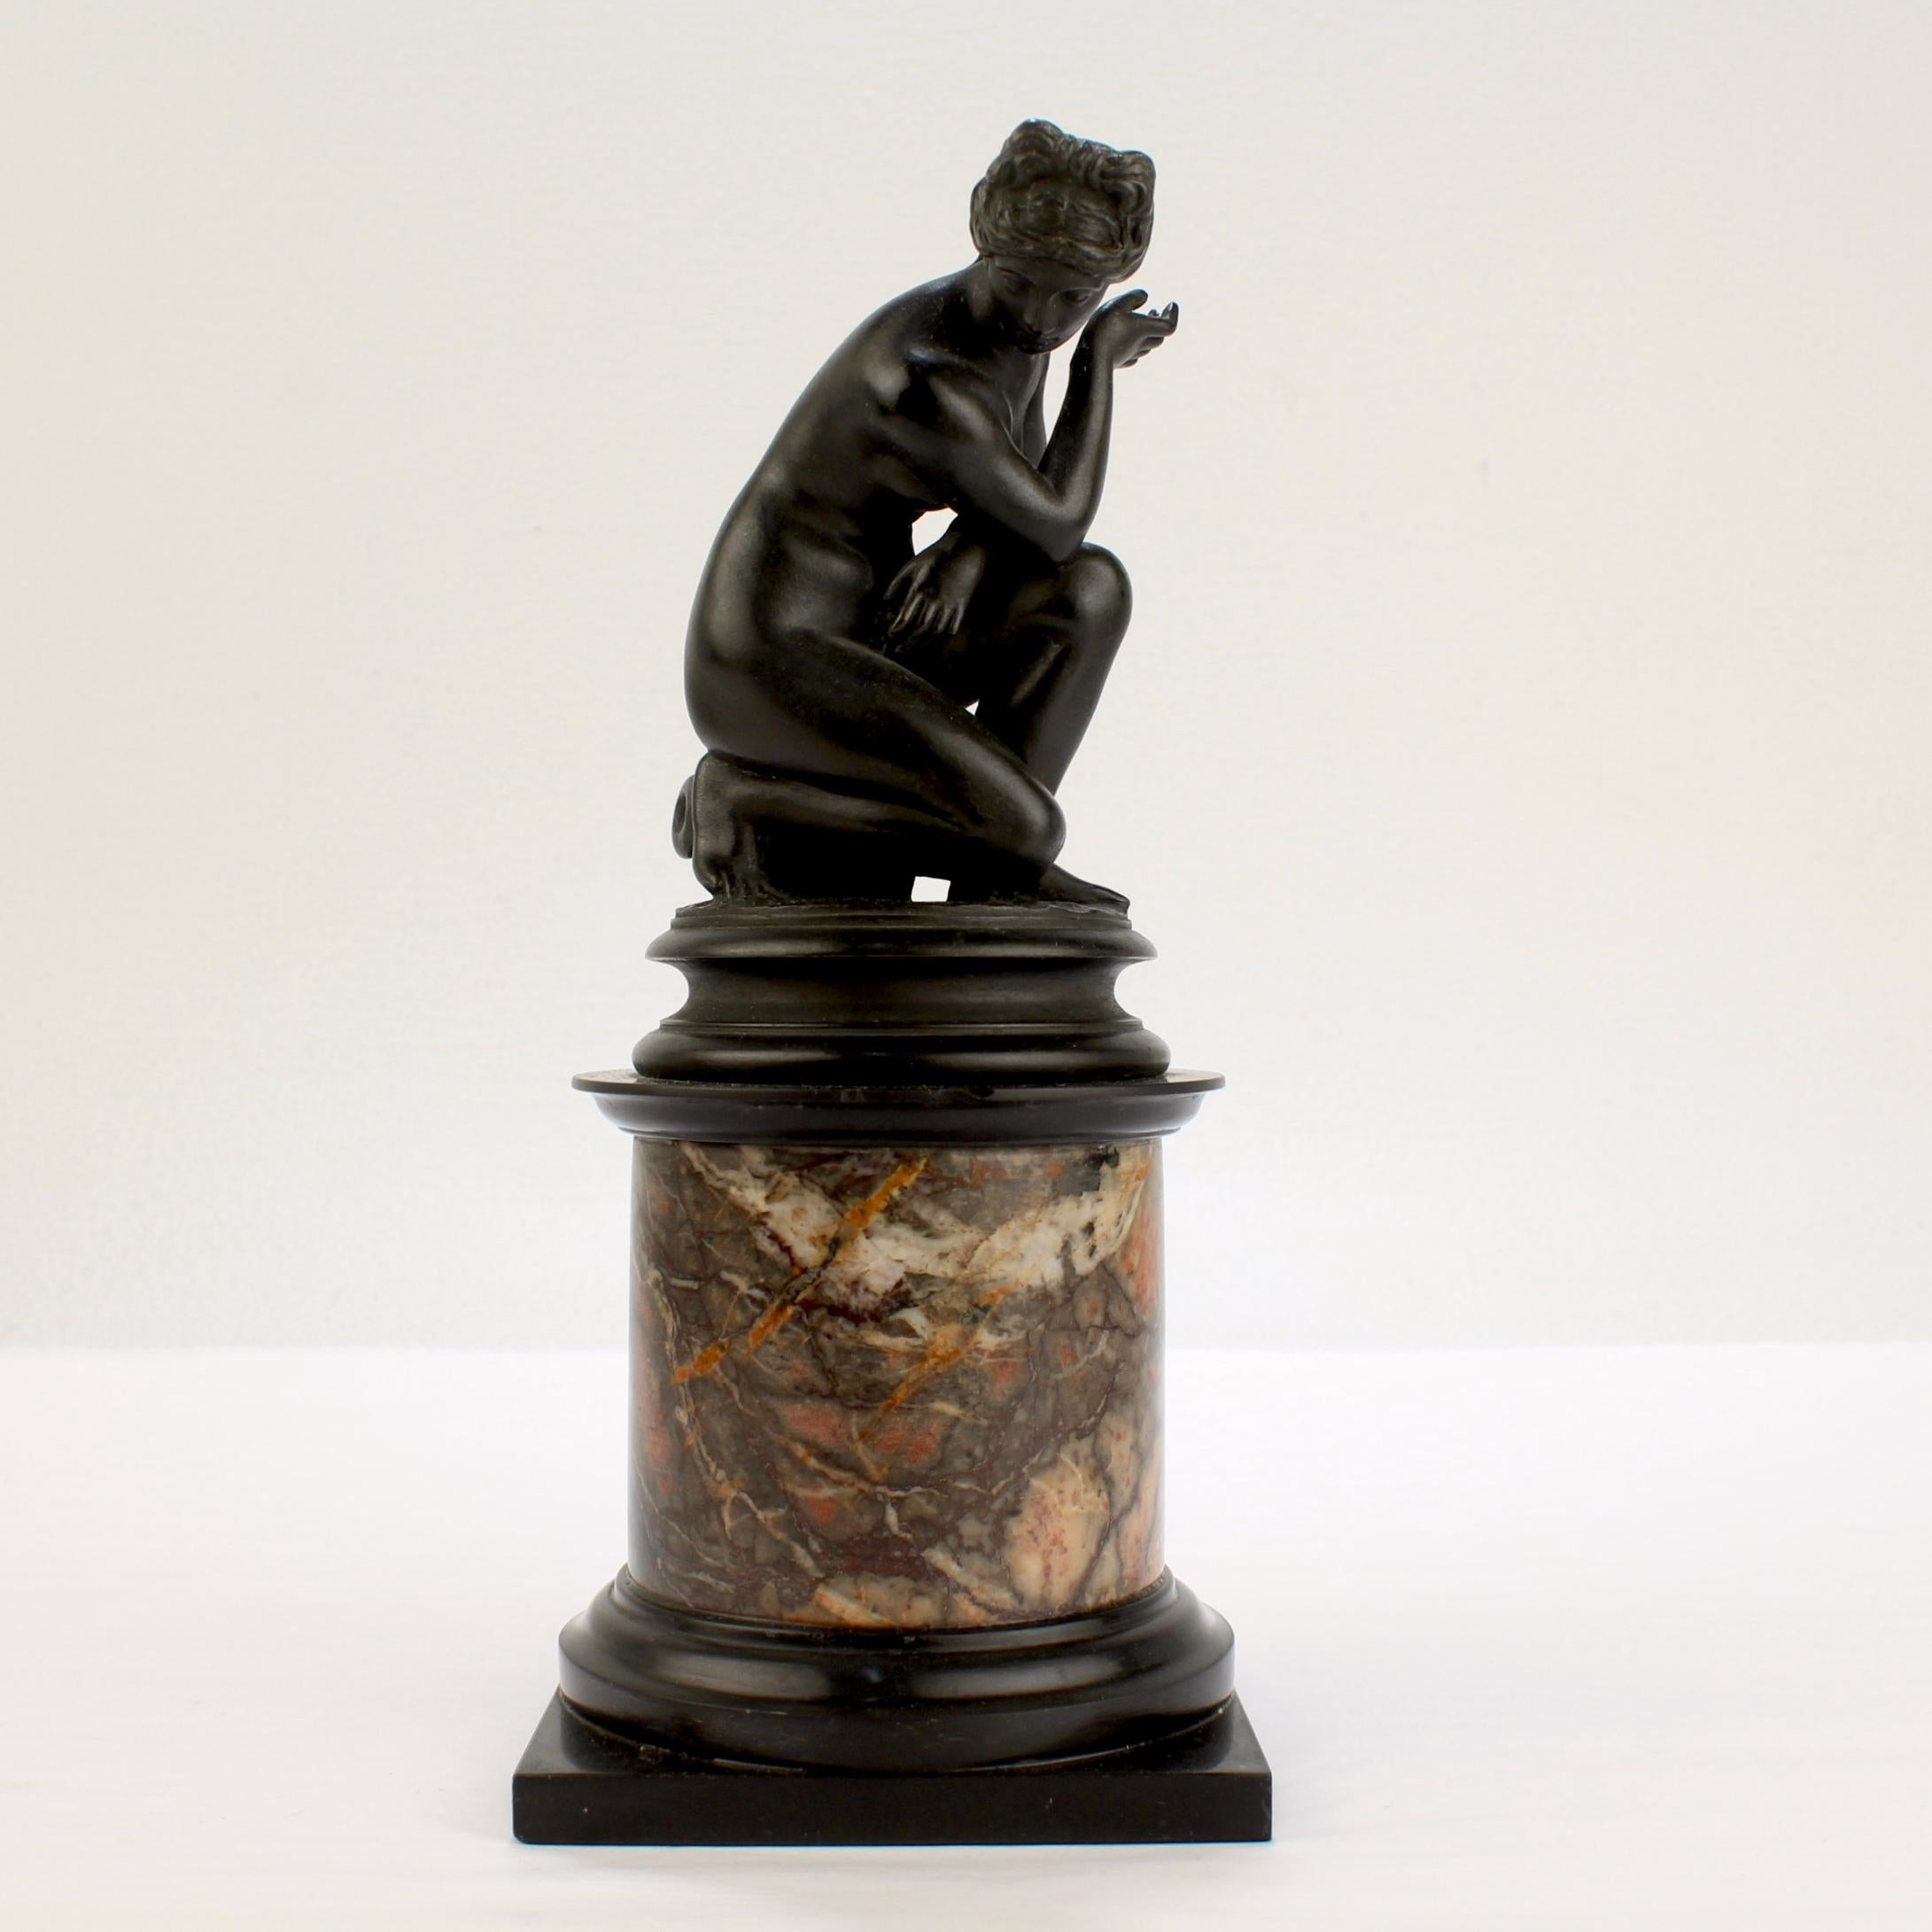 A very fine Grand Tour bronze sculpture.

Modeled after the 'Crouching Venus' by Giambologna.

Depicting Venus surprised at her bath with an overturned urn at her feet. Mounted on a slate and variegated marble plinth. 

Simply a wonderful